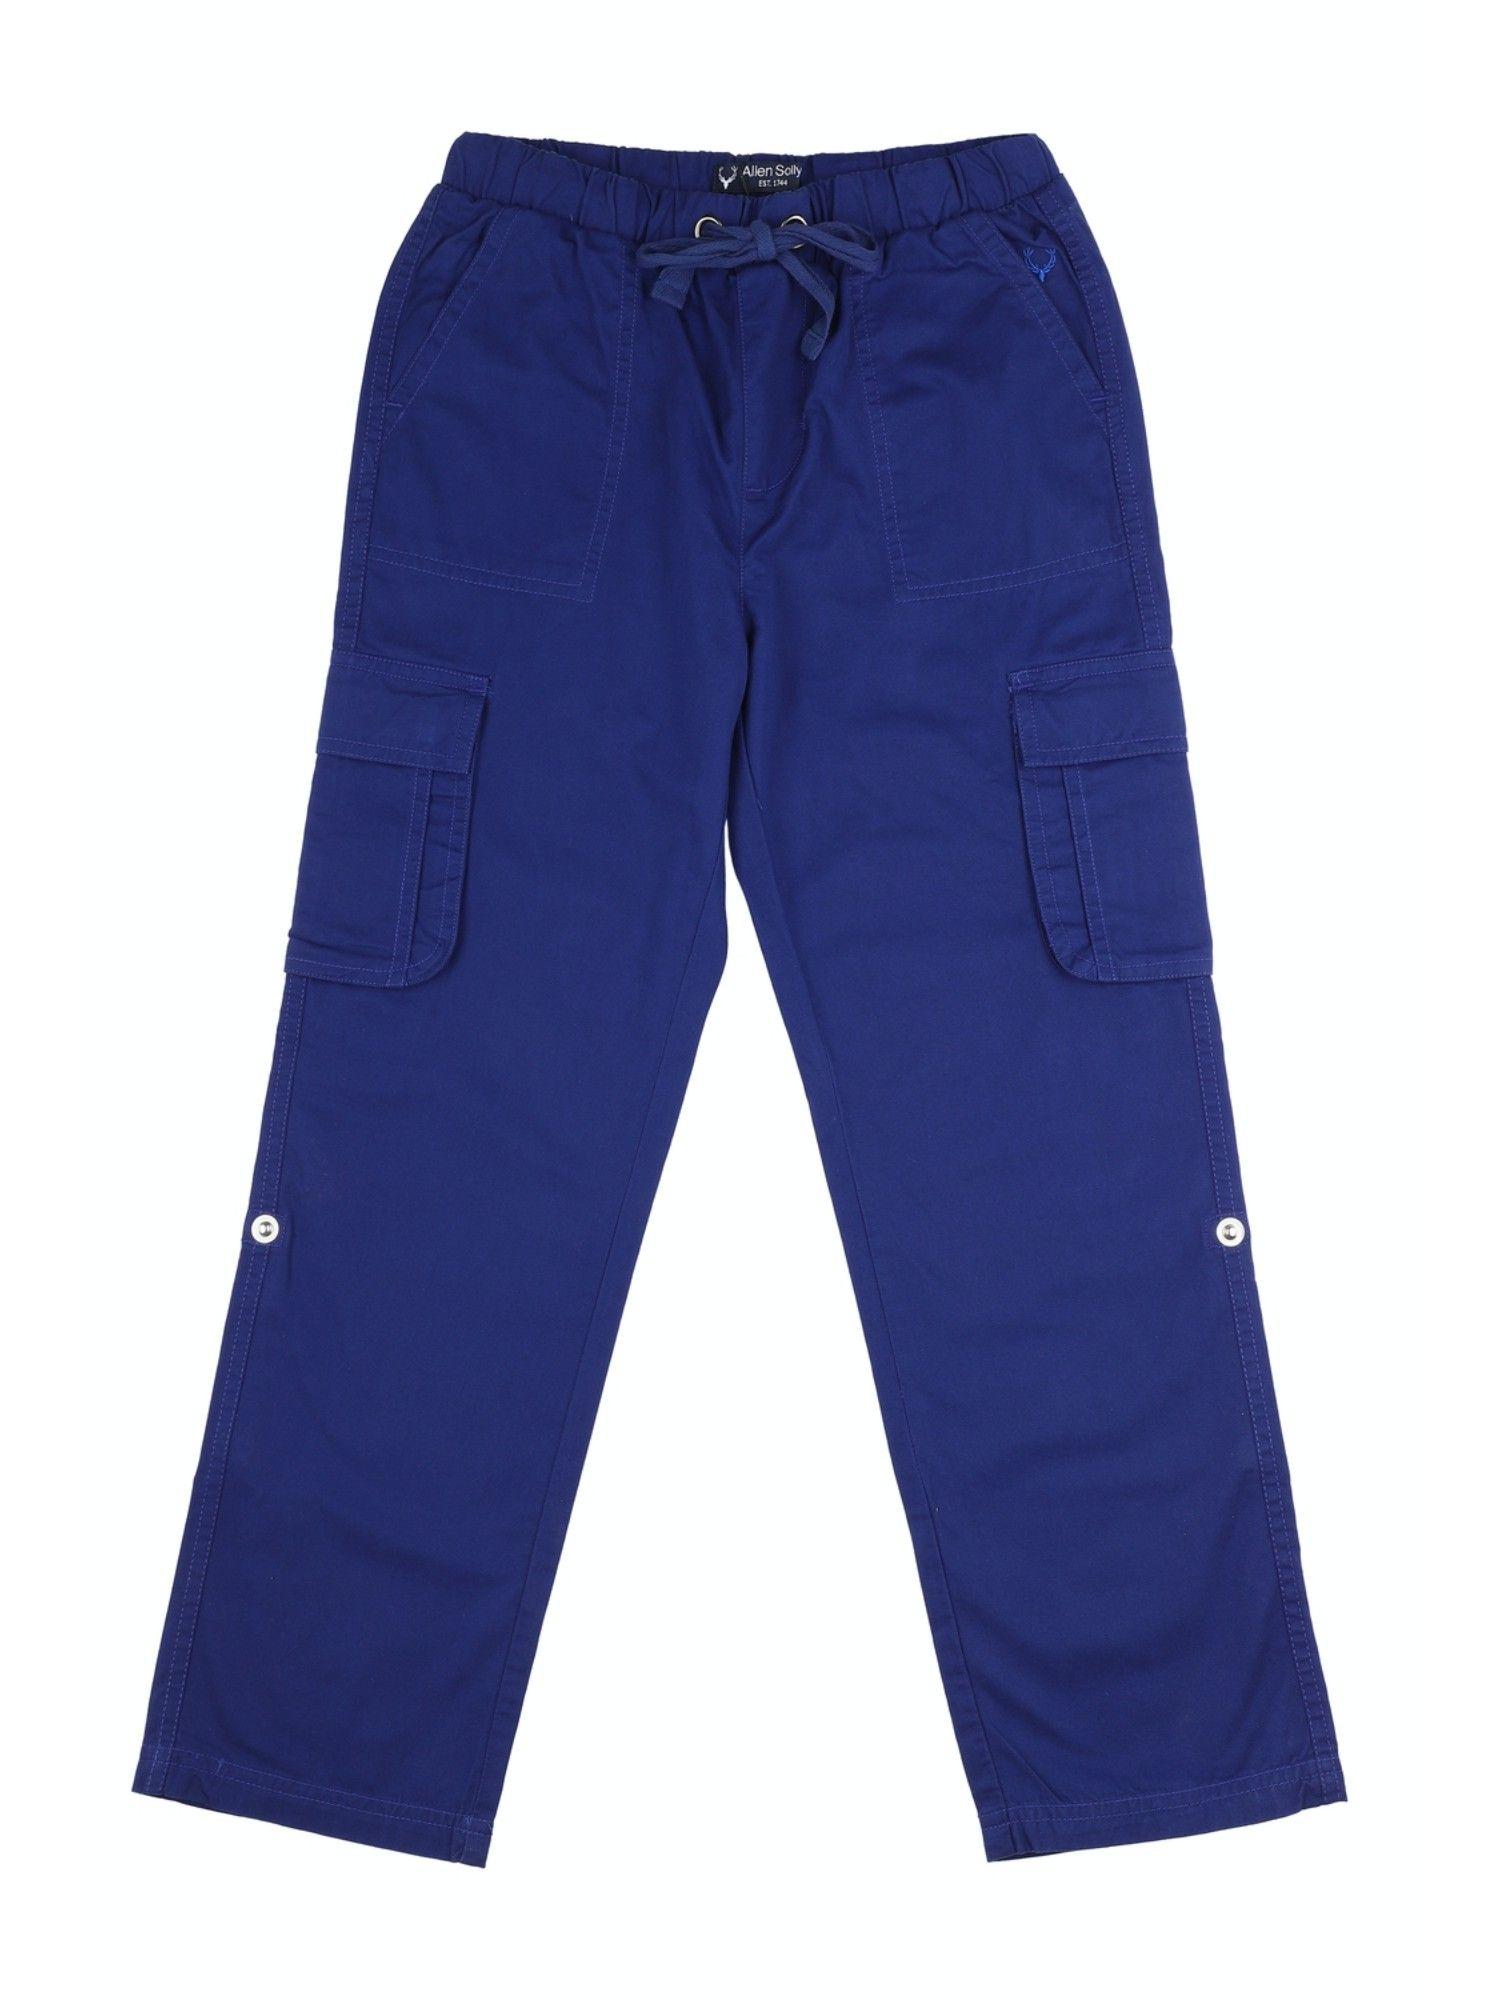 blue-trousers